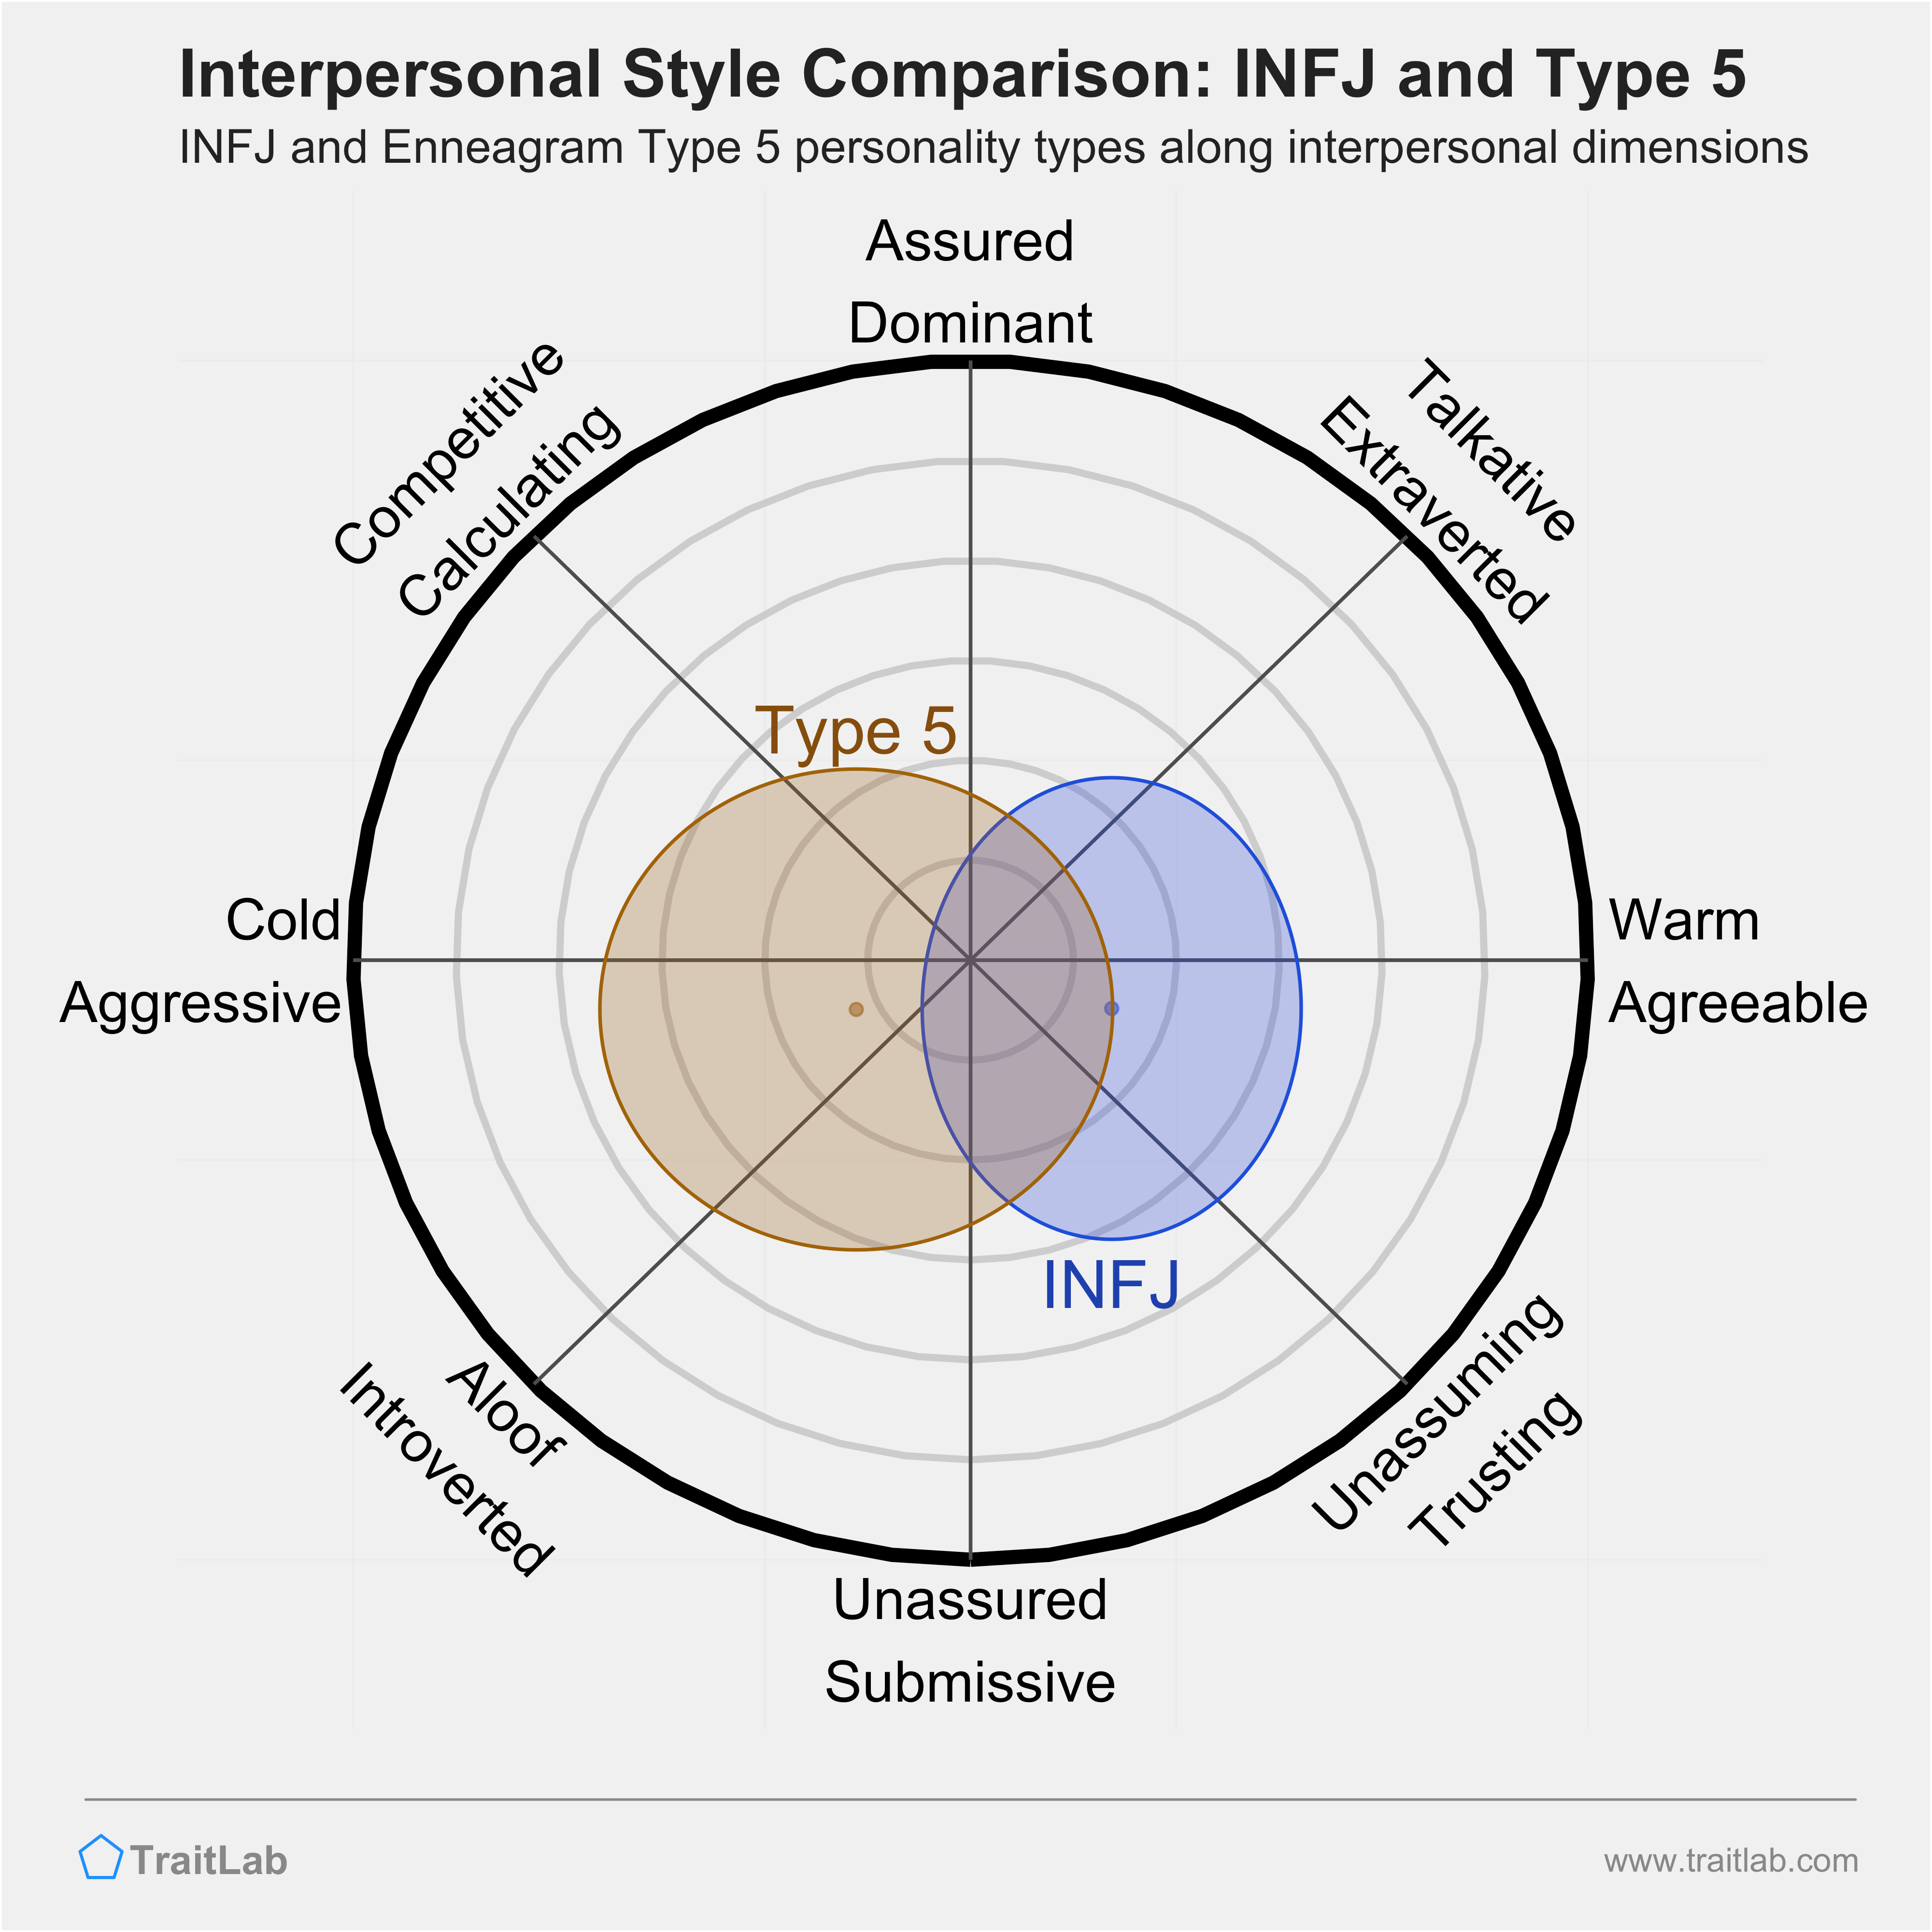 Enneagram INFJ and Type 5 comparison across interpersonal dimensions